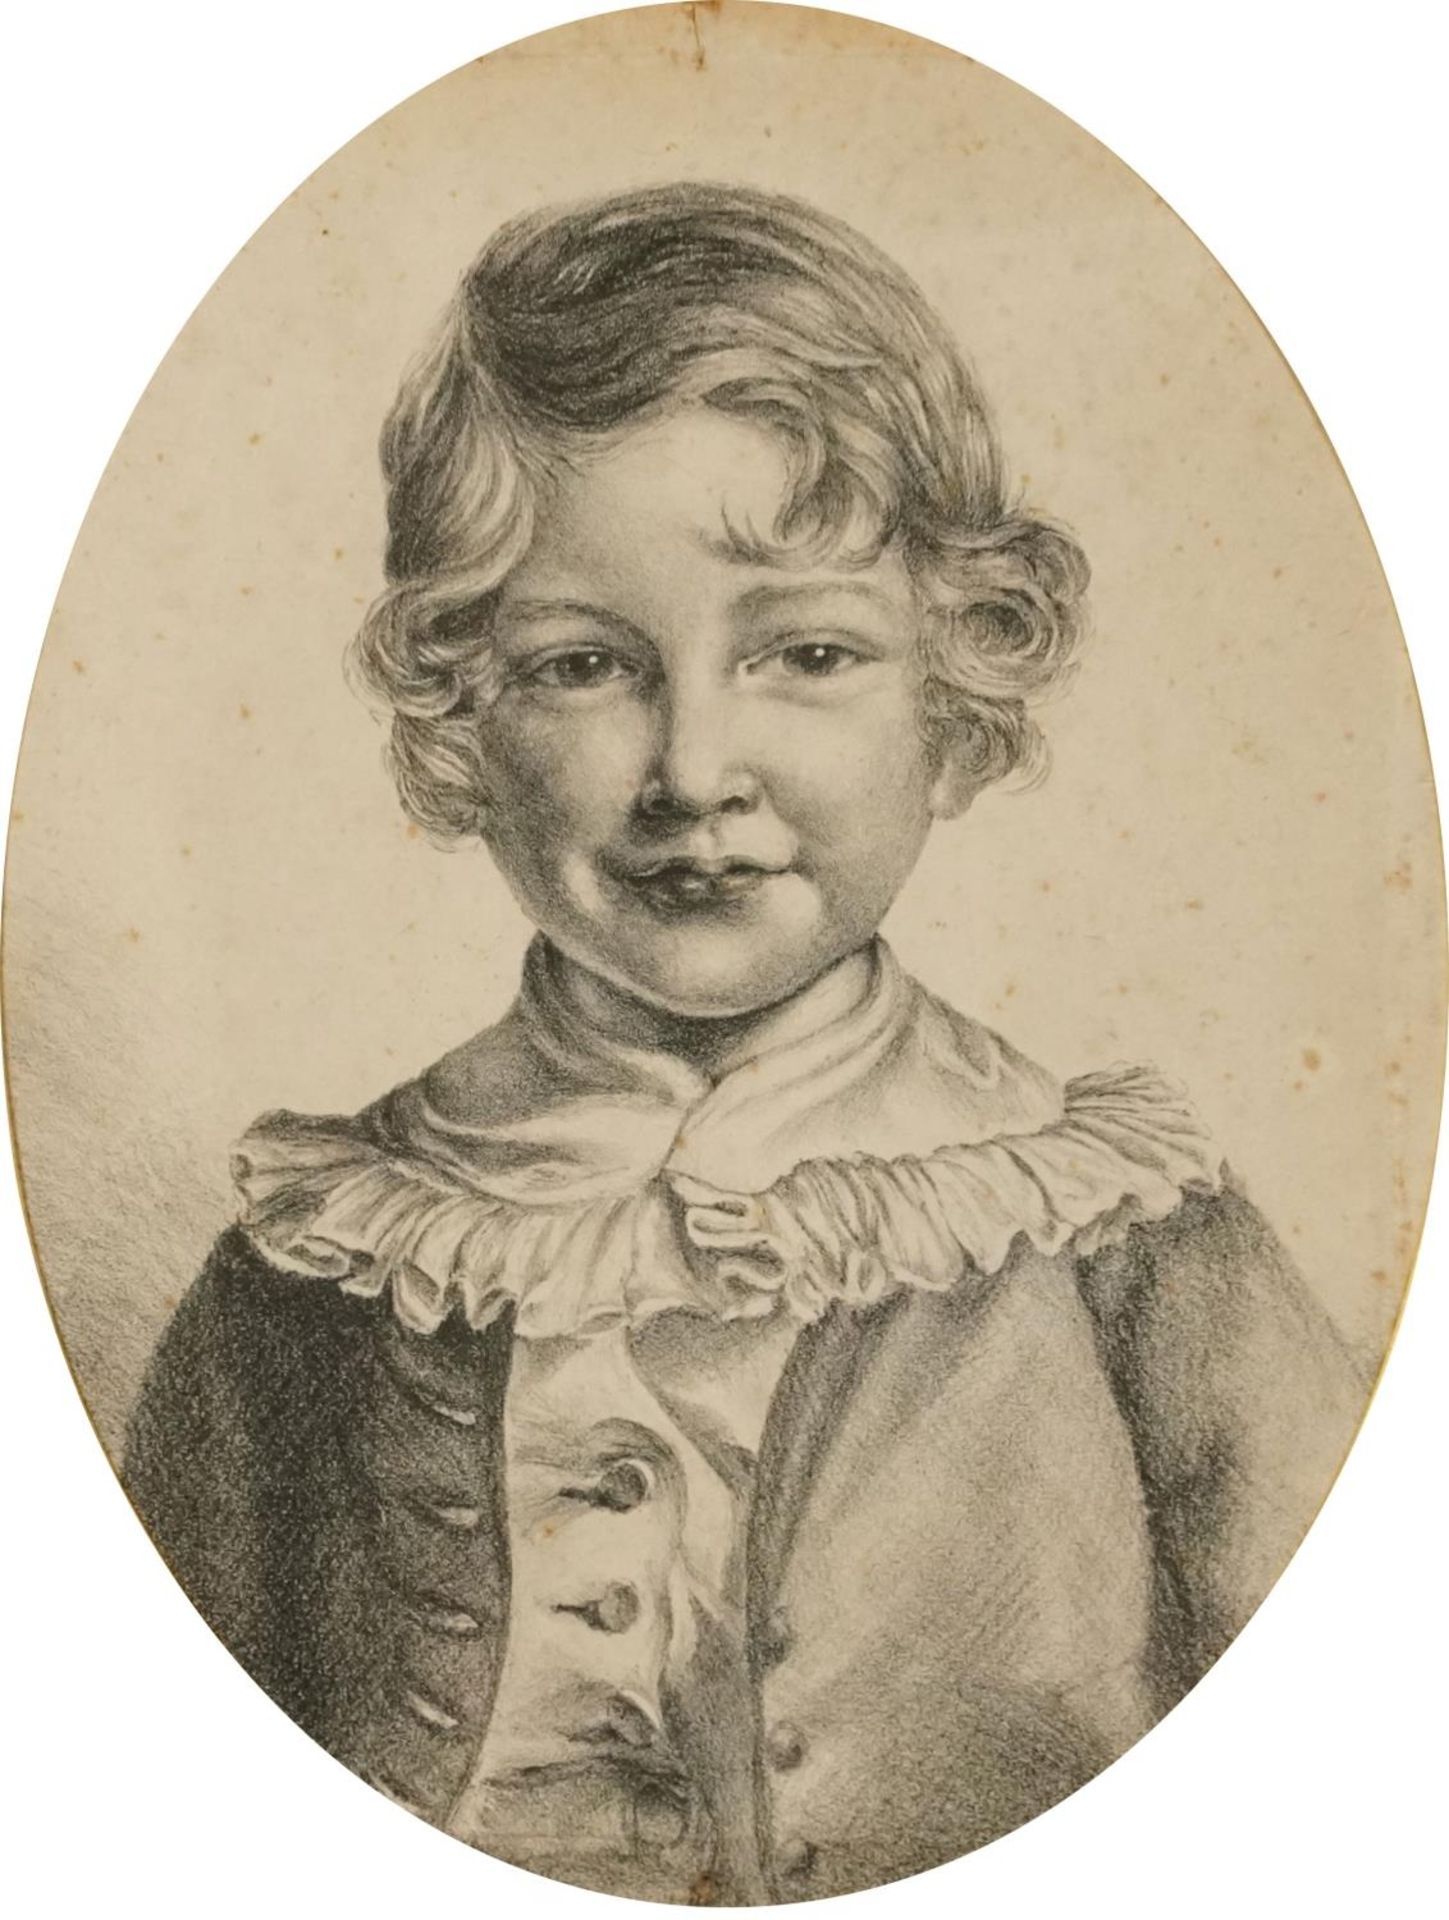 Head and shoulders portrait of a young child, 19th century oval charcoal, various indistinct